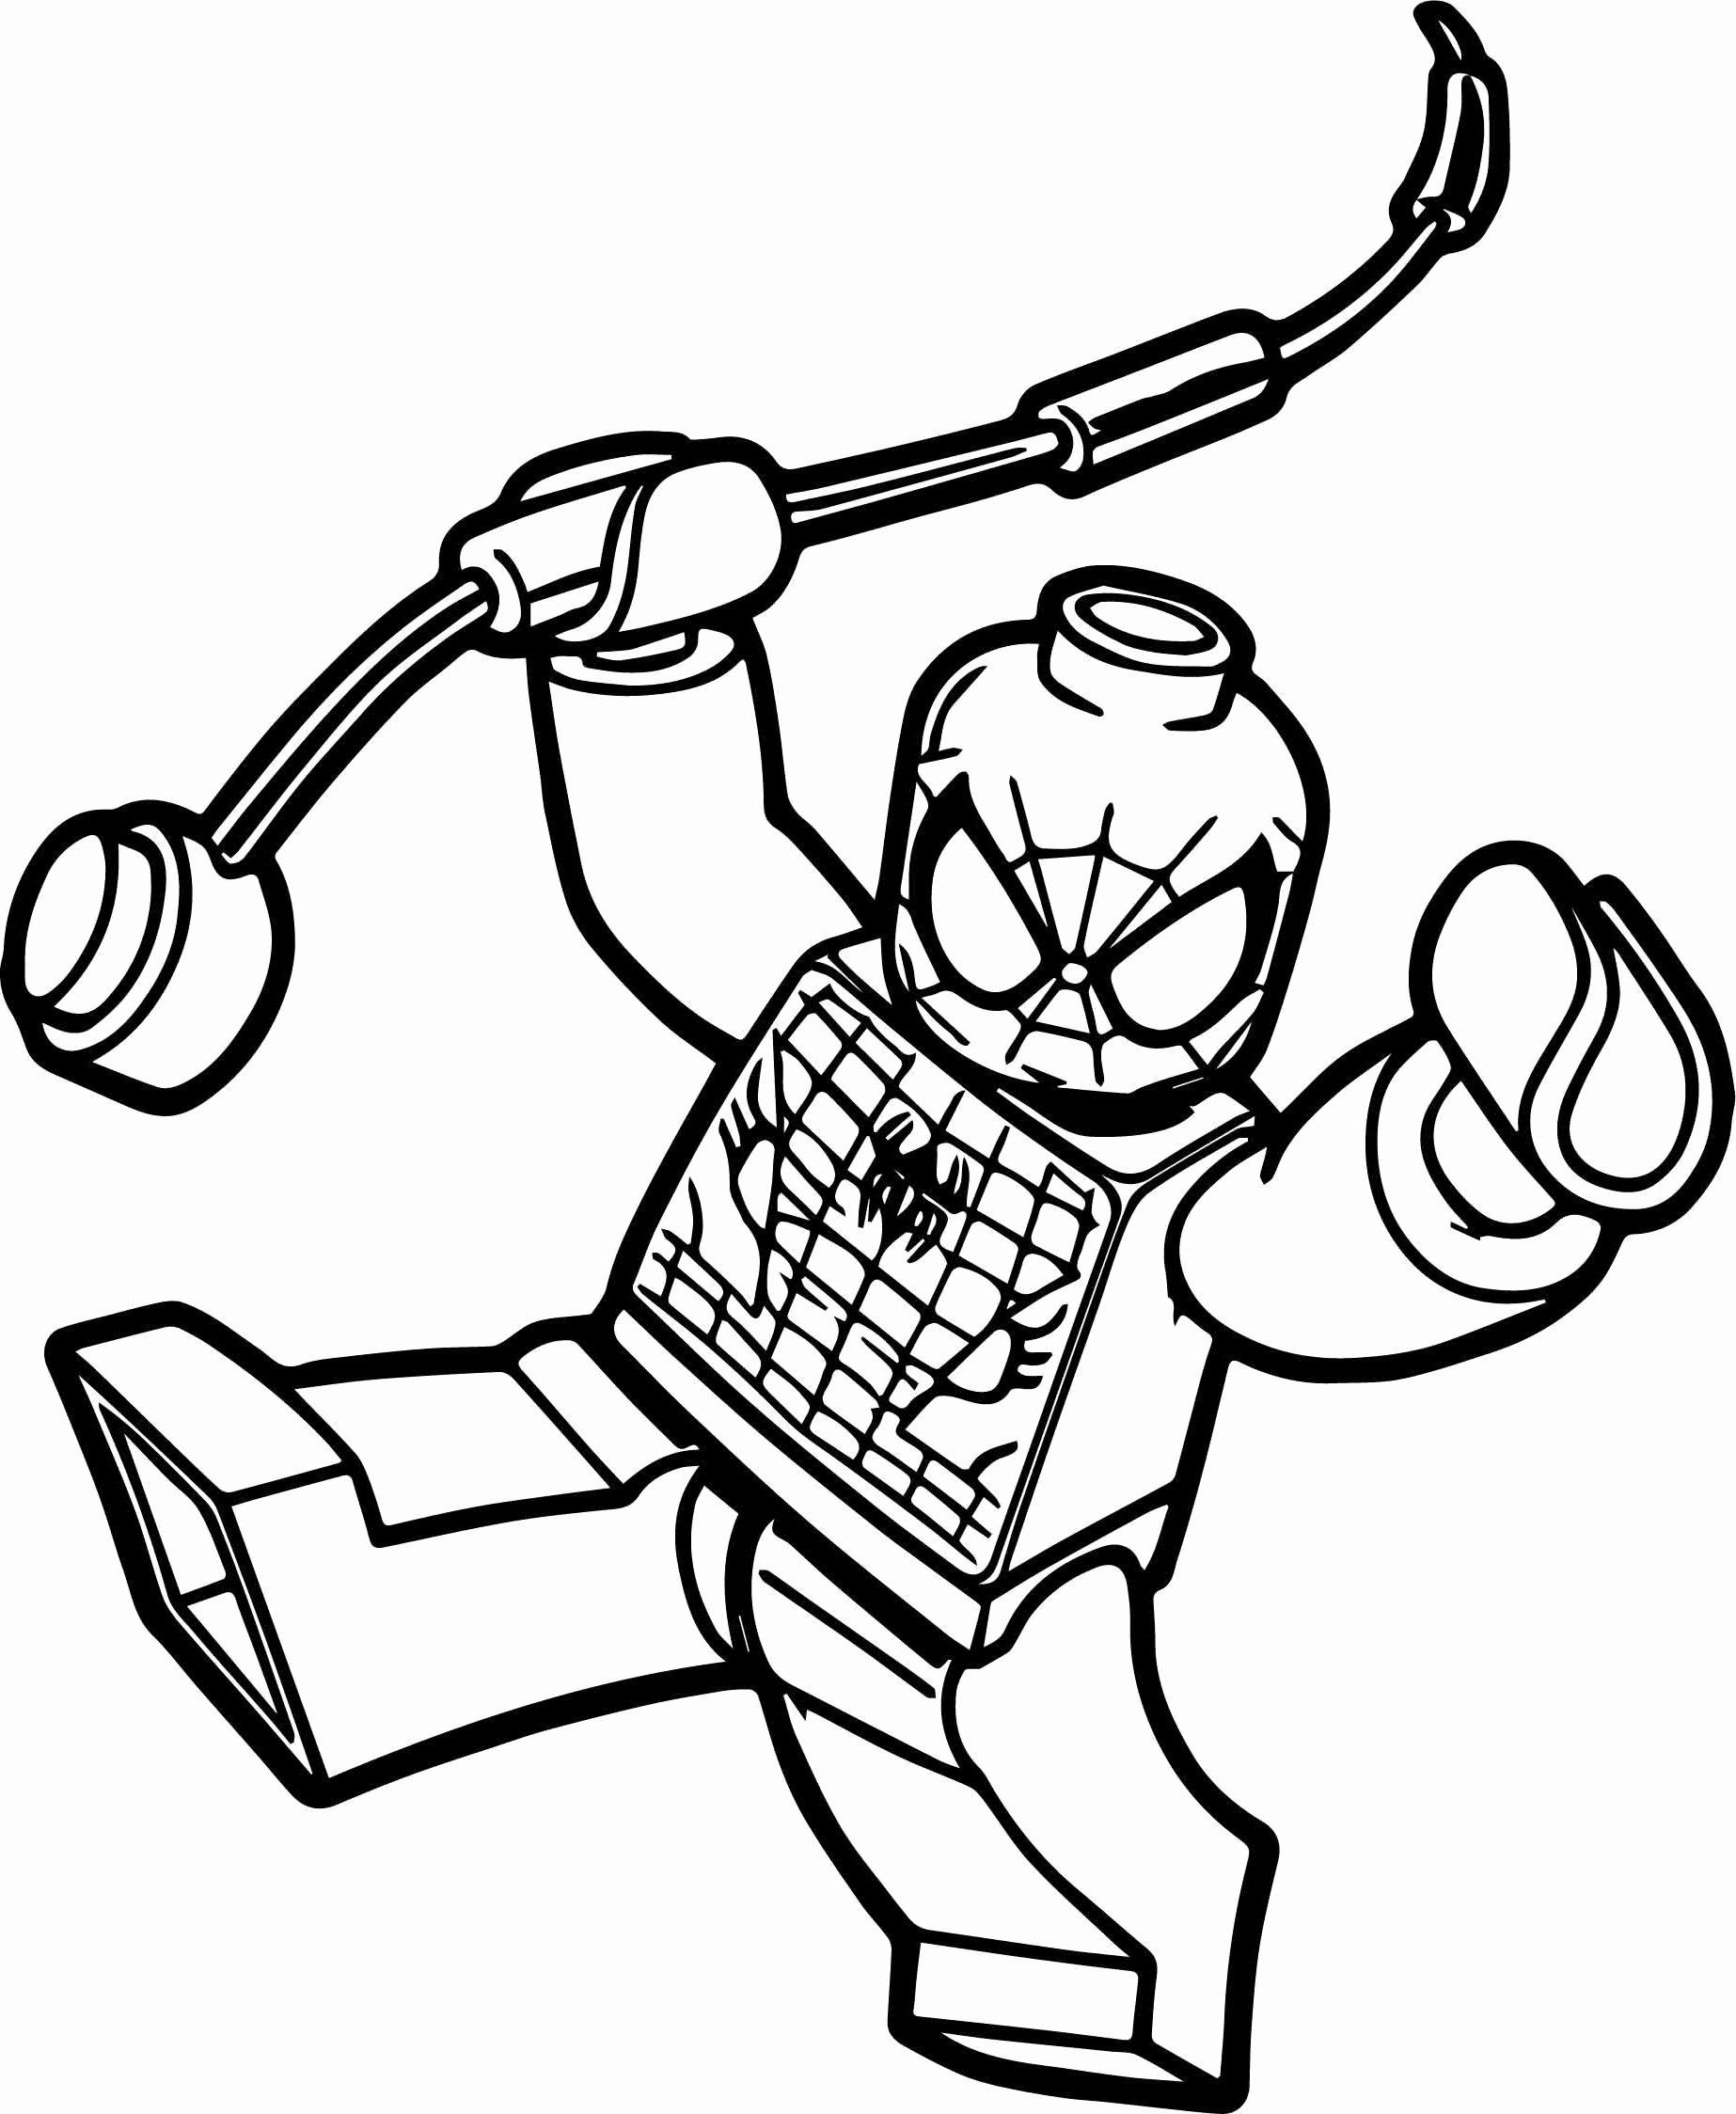 Spiderman Coloring Pages Free Printable - Customize and Print